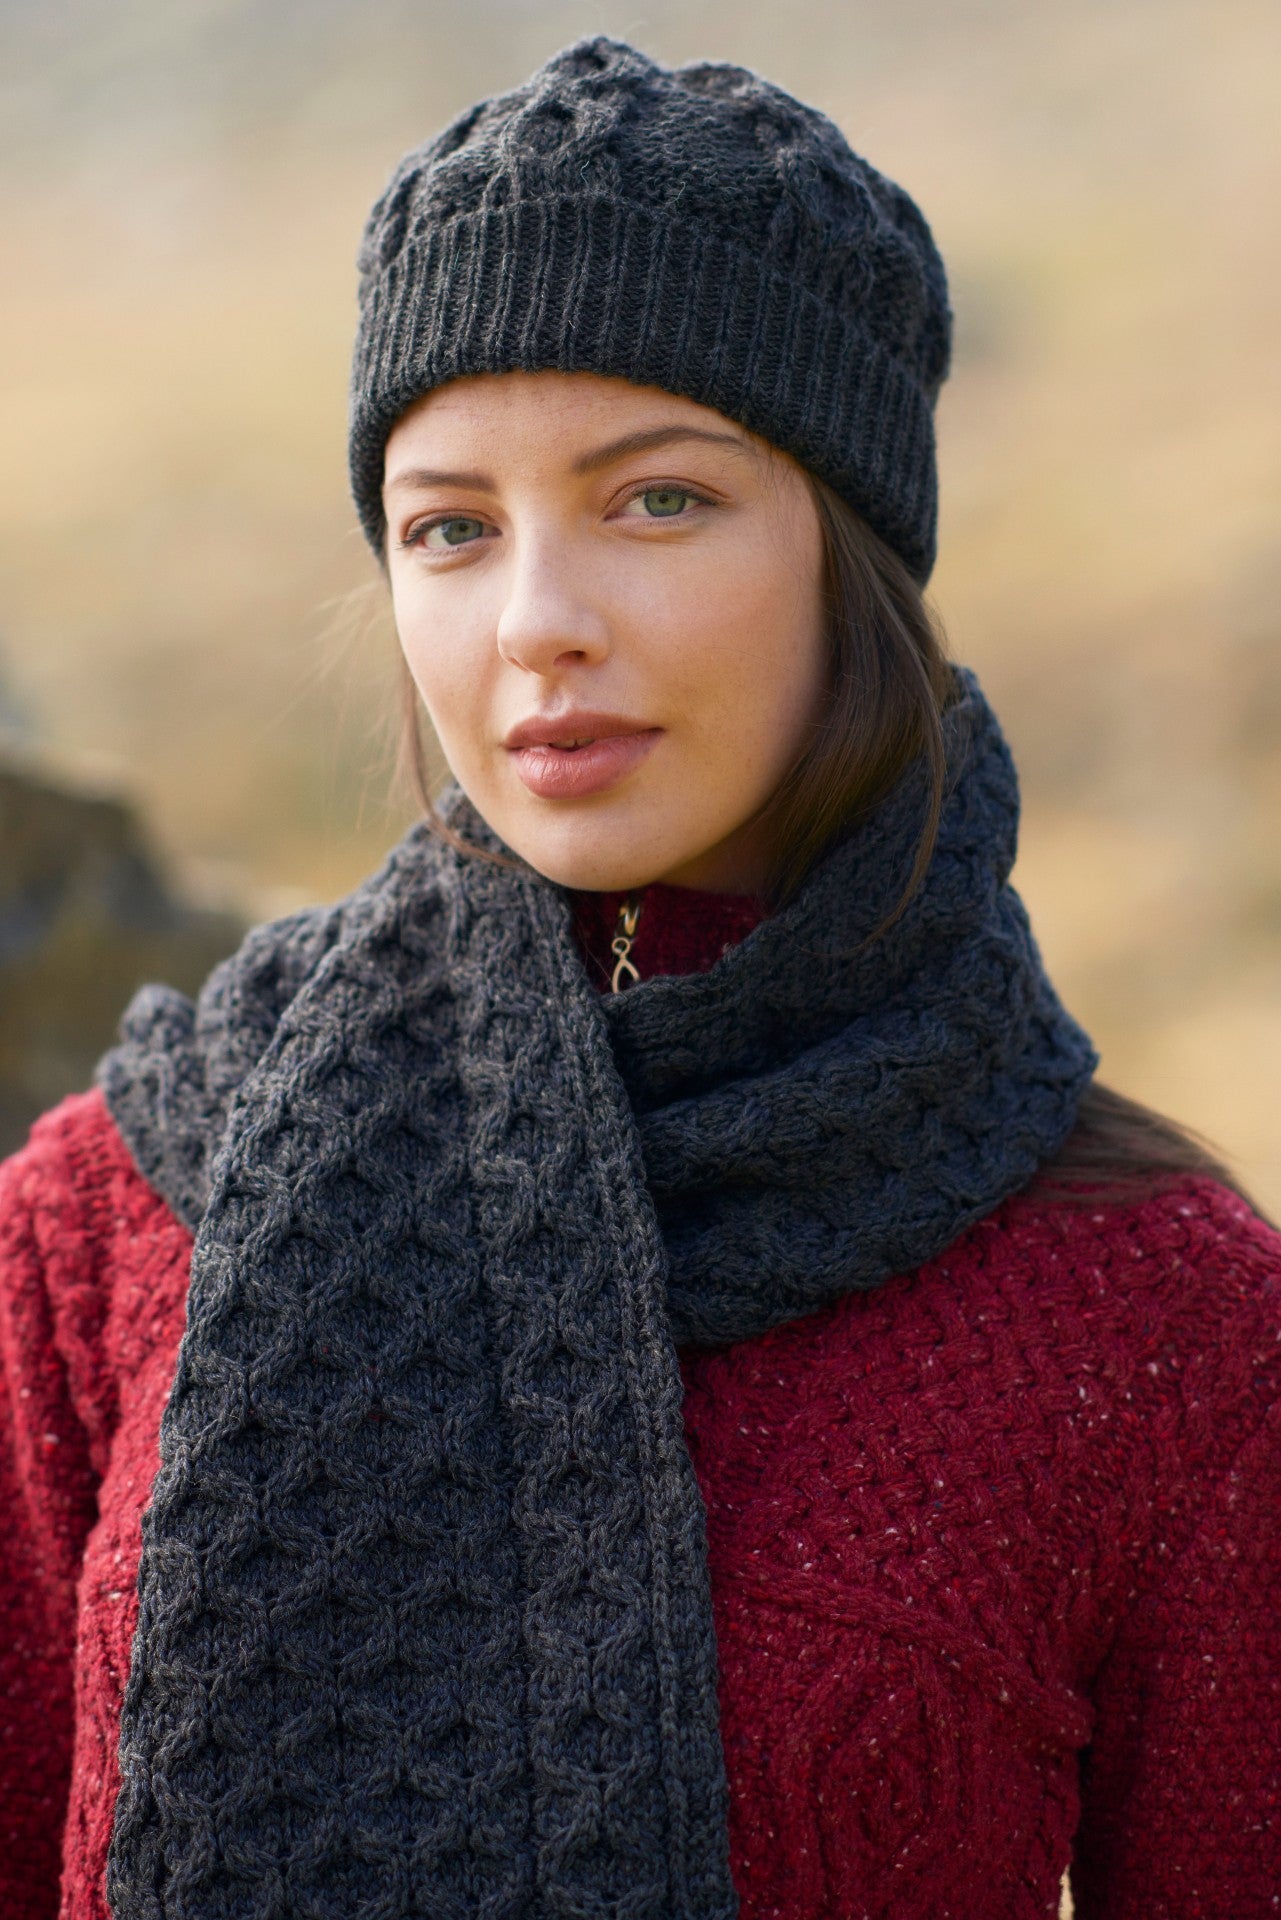 Elevate Your Winter Style with Aran Cable Knit Pom Pom Scarf